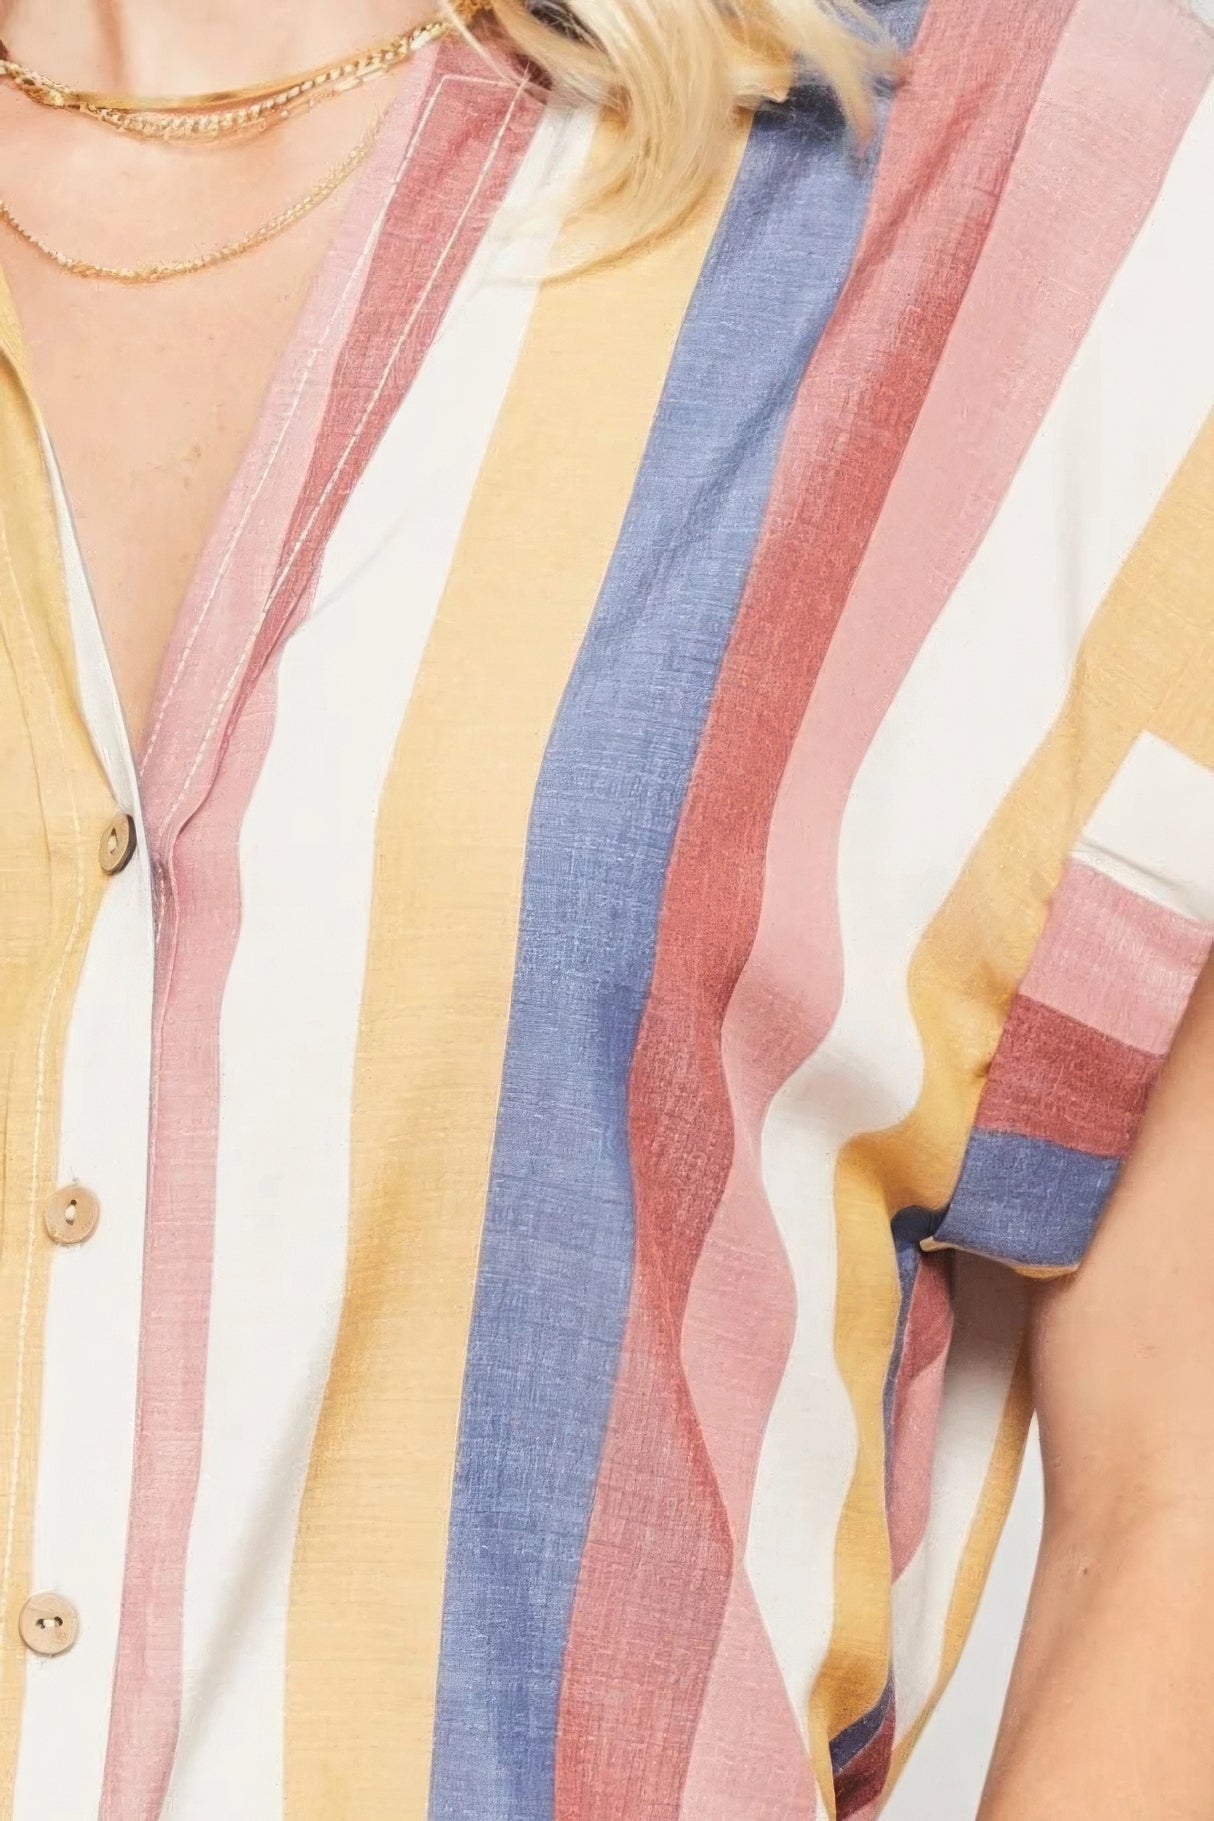 Woven Shirt In Multicolor Striped With Collared Neckline